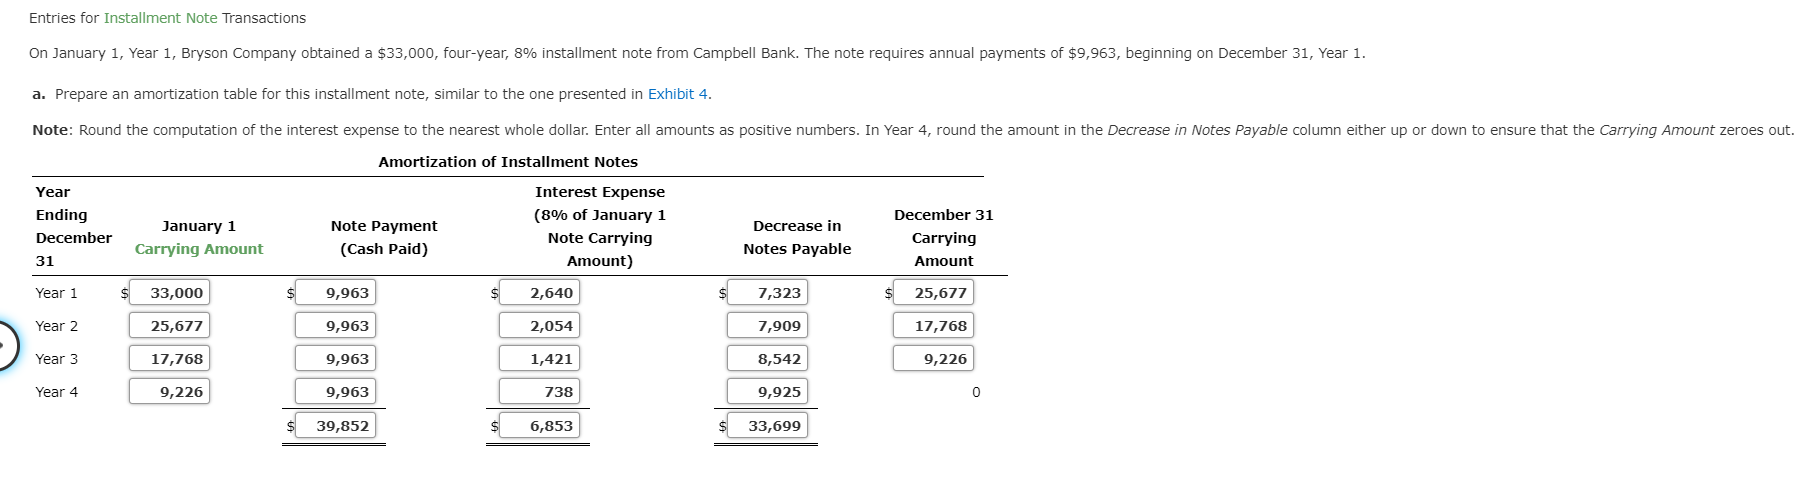 Entries for Installment Note Transactions
On January 1, Year 1, Bryson Company obtained a $33,000, four-year, 8% installment note from Campbell Bank. The note requires annual payments of $9,963, beginning on December 31, Year 1.
a. Prepare an amortization table for this installment note, similar to the one presented in Exhibit 4
Note: Round the computation of the interest expense to the nearest whole dollar. Enter all amounts as positive numbers. In Year 4, round the amount in the Decrease in Notes Payable column either up or down to ensure that the Carrying Amount zeroes out.
Amortization of Installment Notes
Year
Ending
December
31
Year 1
Year 2
Year 3
Interest Expense
(800 of January 1
Note Carrying
Amount)
December 31
Carrying
Amount
Decrease in
January 1
Carrying Amount
Note Payment
(Cash Paid)
Notes Payable
9,963
9,963
9,963
9,963
39,852
2,640
2,054
1,421
738
6,853
33,000
25,677
17,768
9,226
7,323
7,909
8,542
9,925
33,699
25,677
17,768
9,226
Year 4
0
